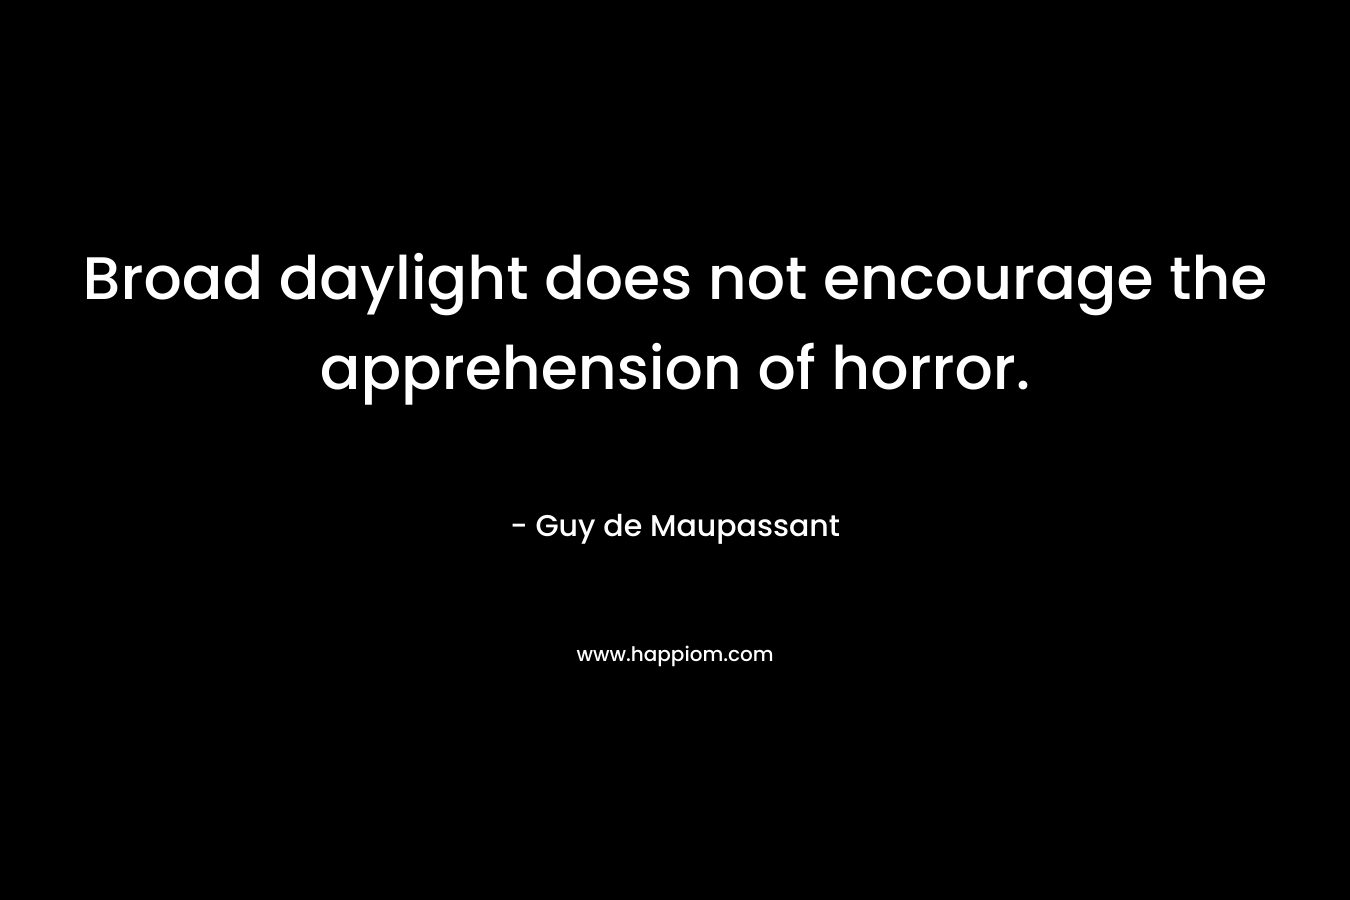 Broad daylight does not encourage the apprehension of horror.